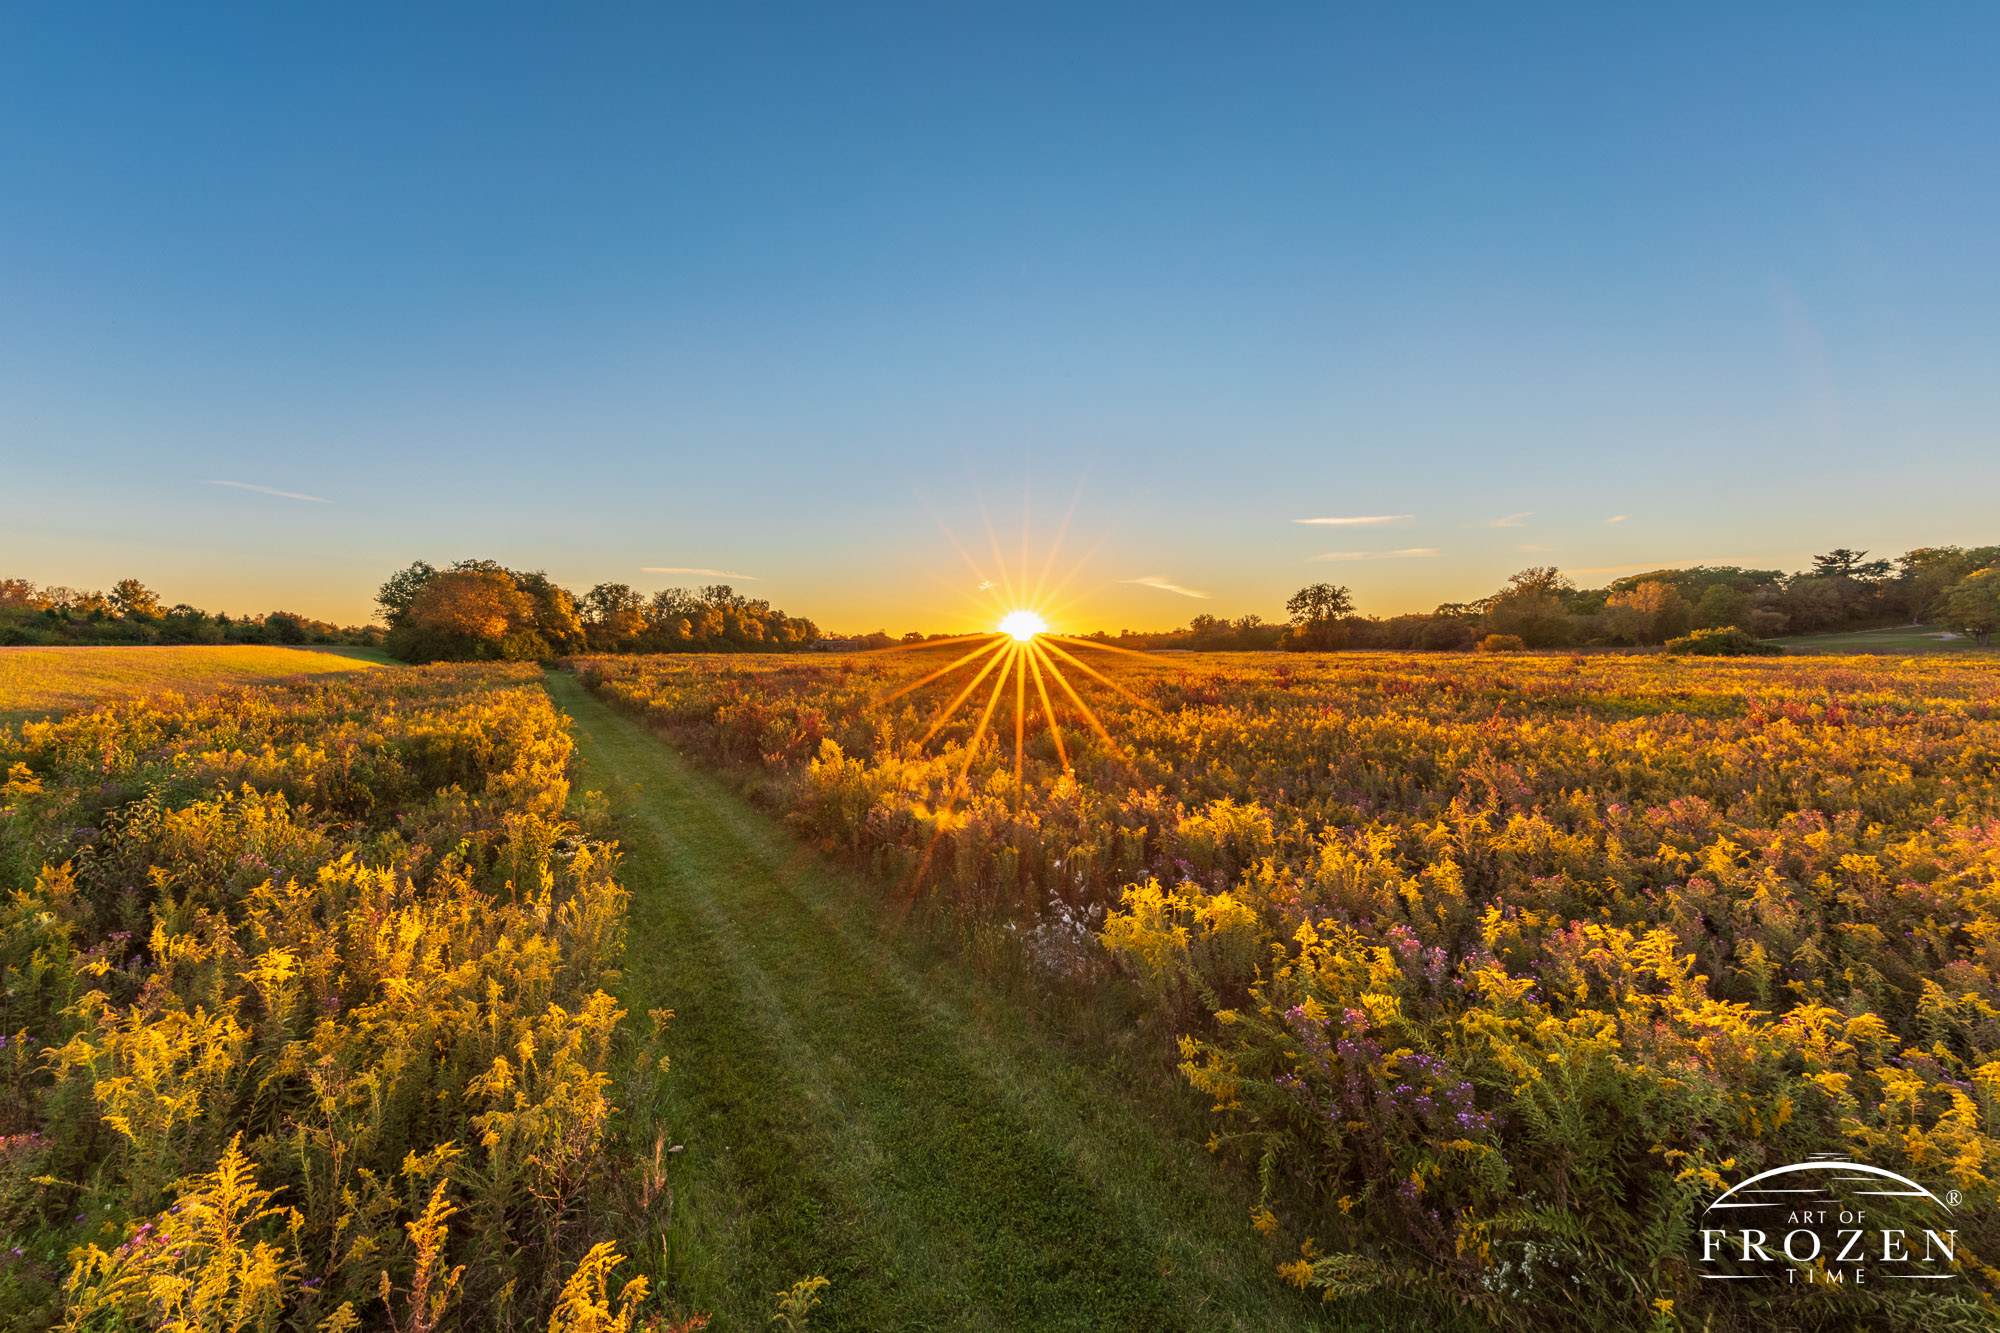 The setting sun paints the Battle of Peckuwe Historical Battlesite as the golden rays backllight the Ohio Golden Rod and a path leads the eye towards the Davidson Interpretive Center.